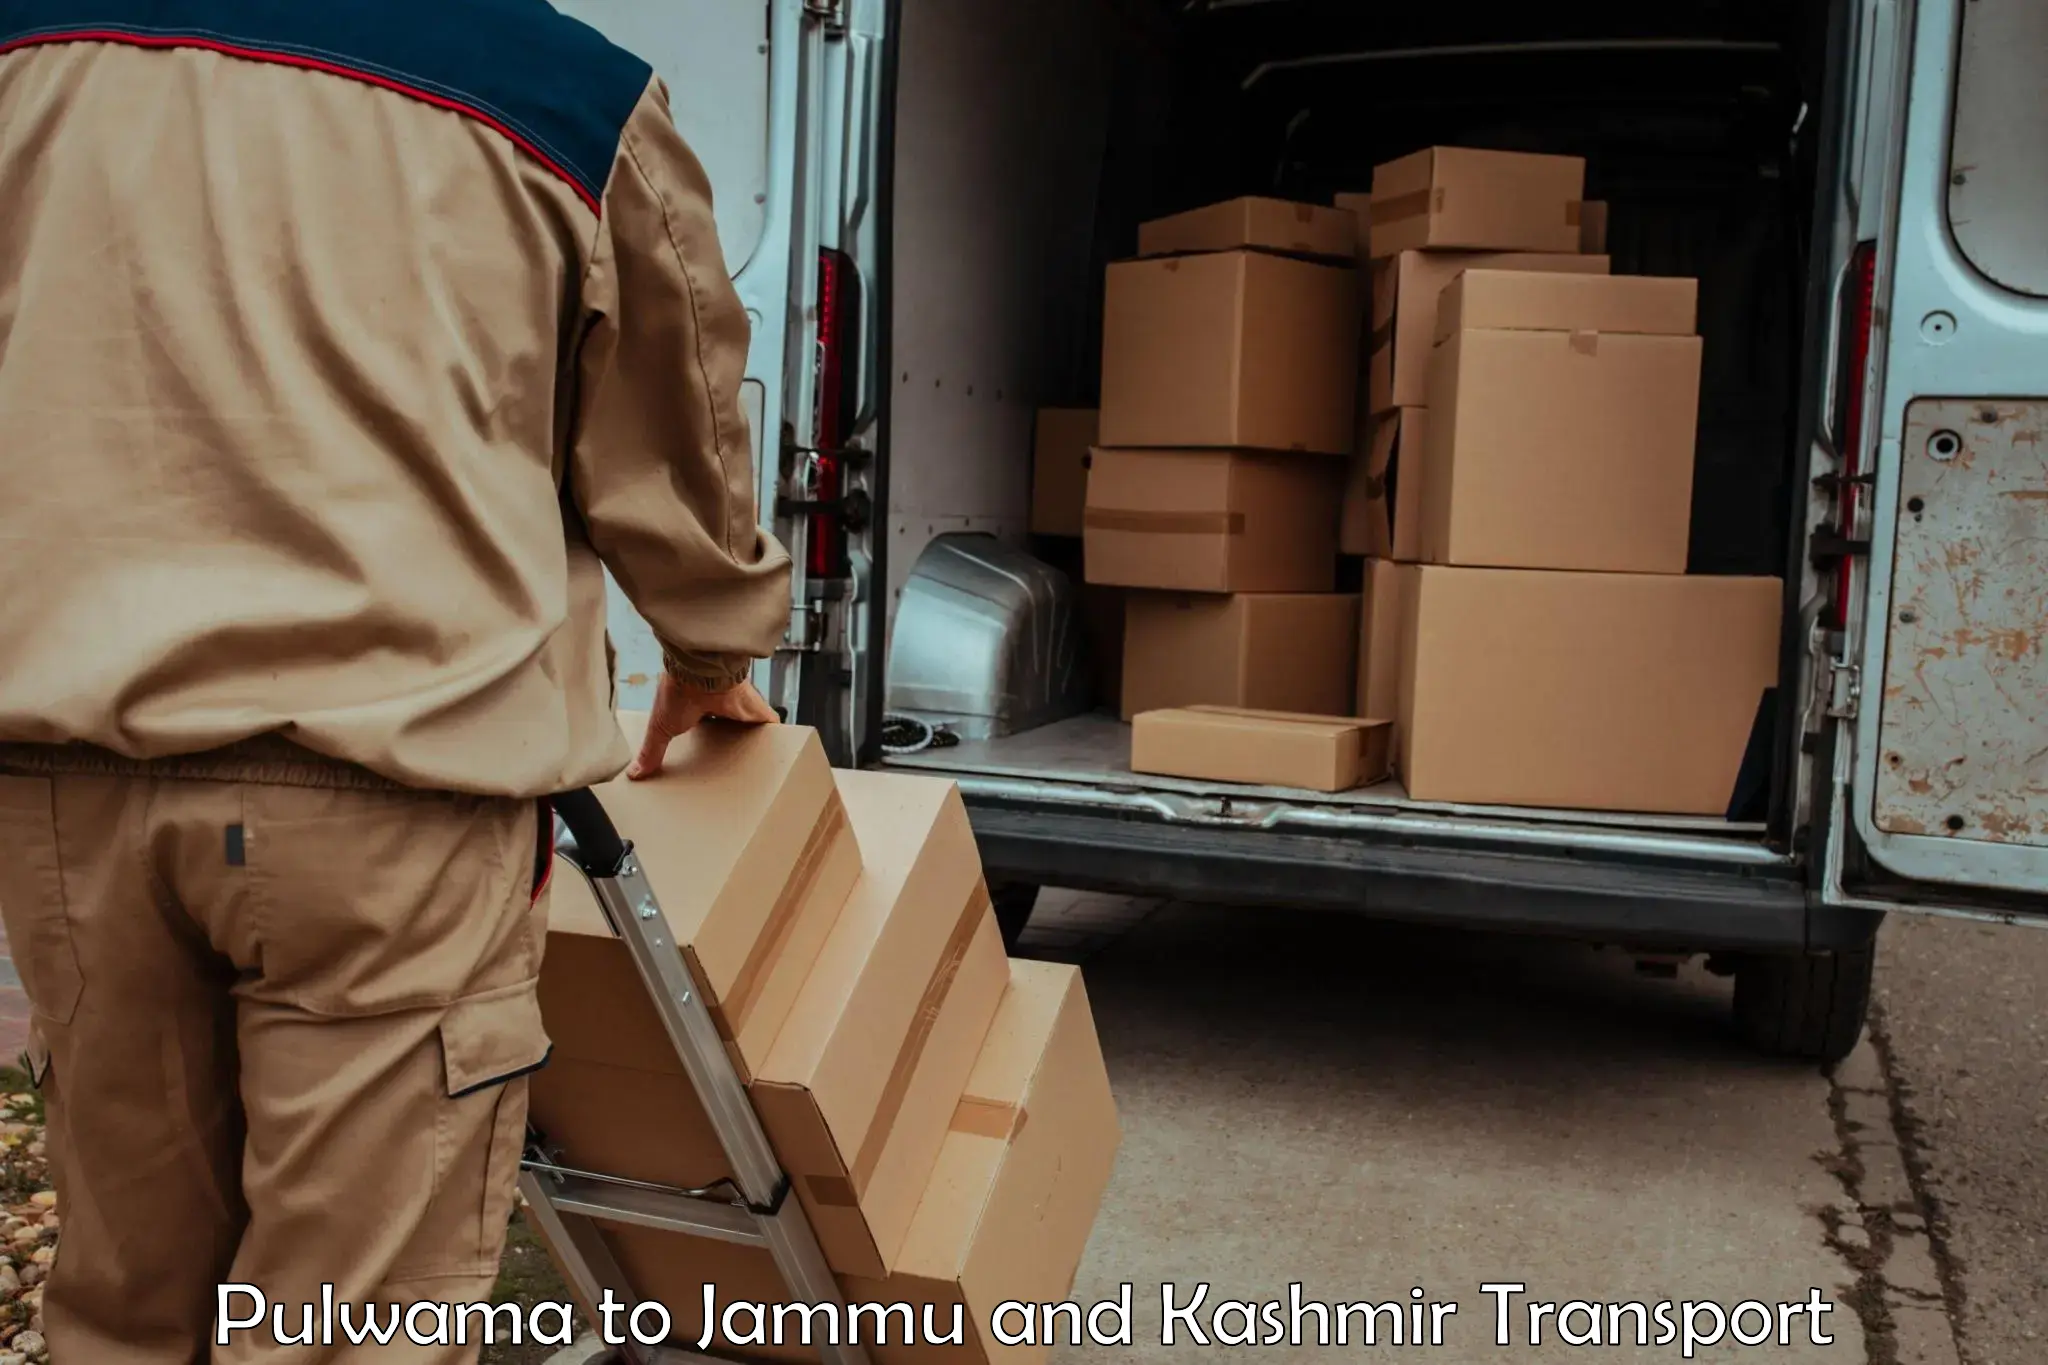 Inland transportation services Pulwama to Shopian